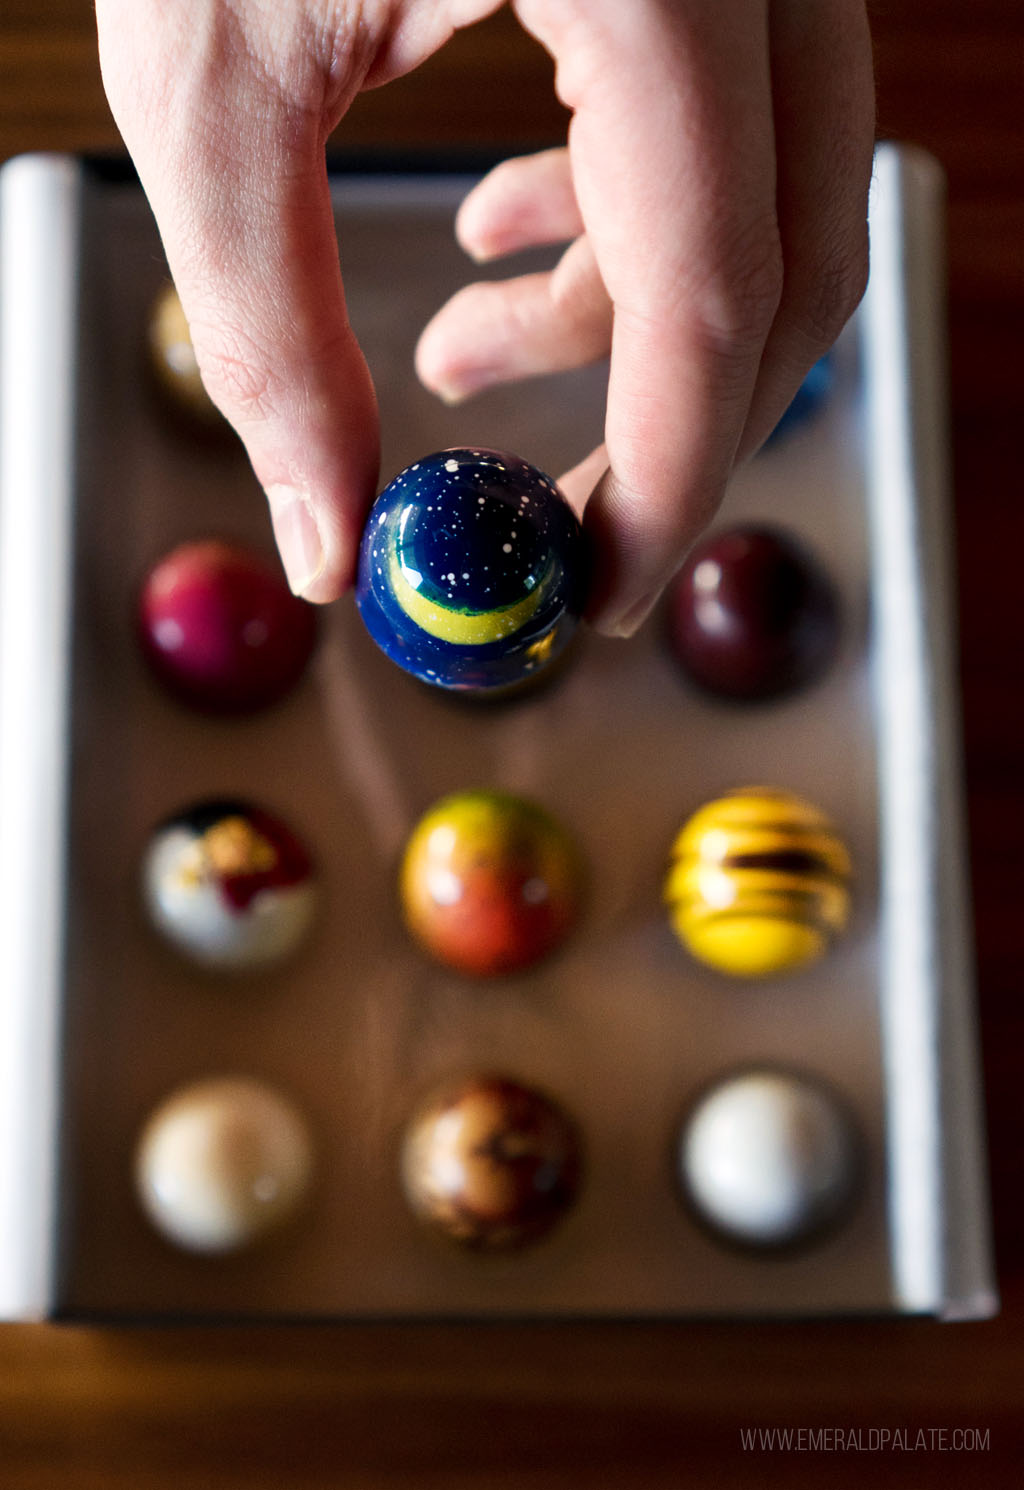 person holding a blue bonbon with a moon and stars painted on it